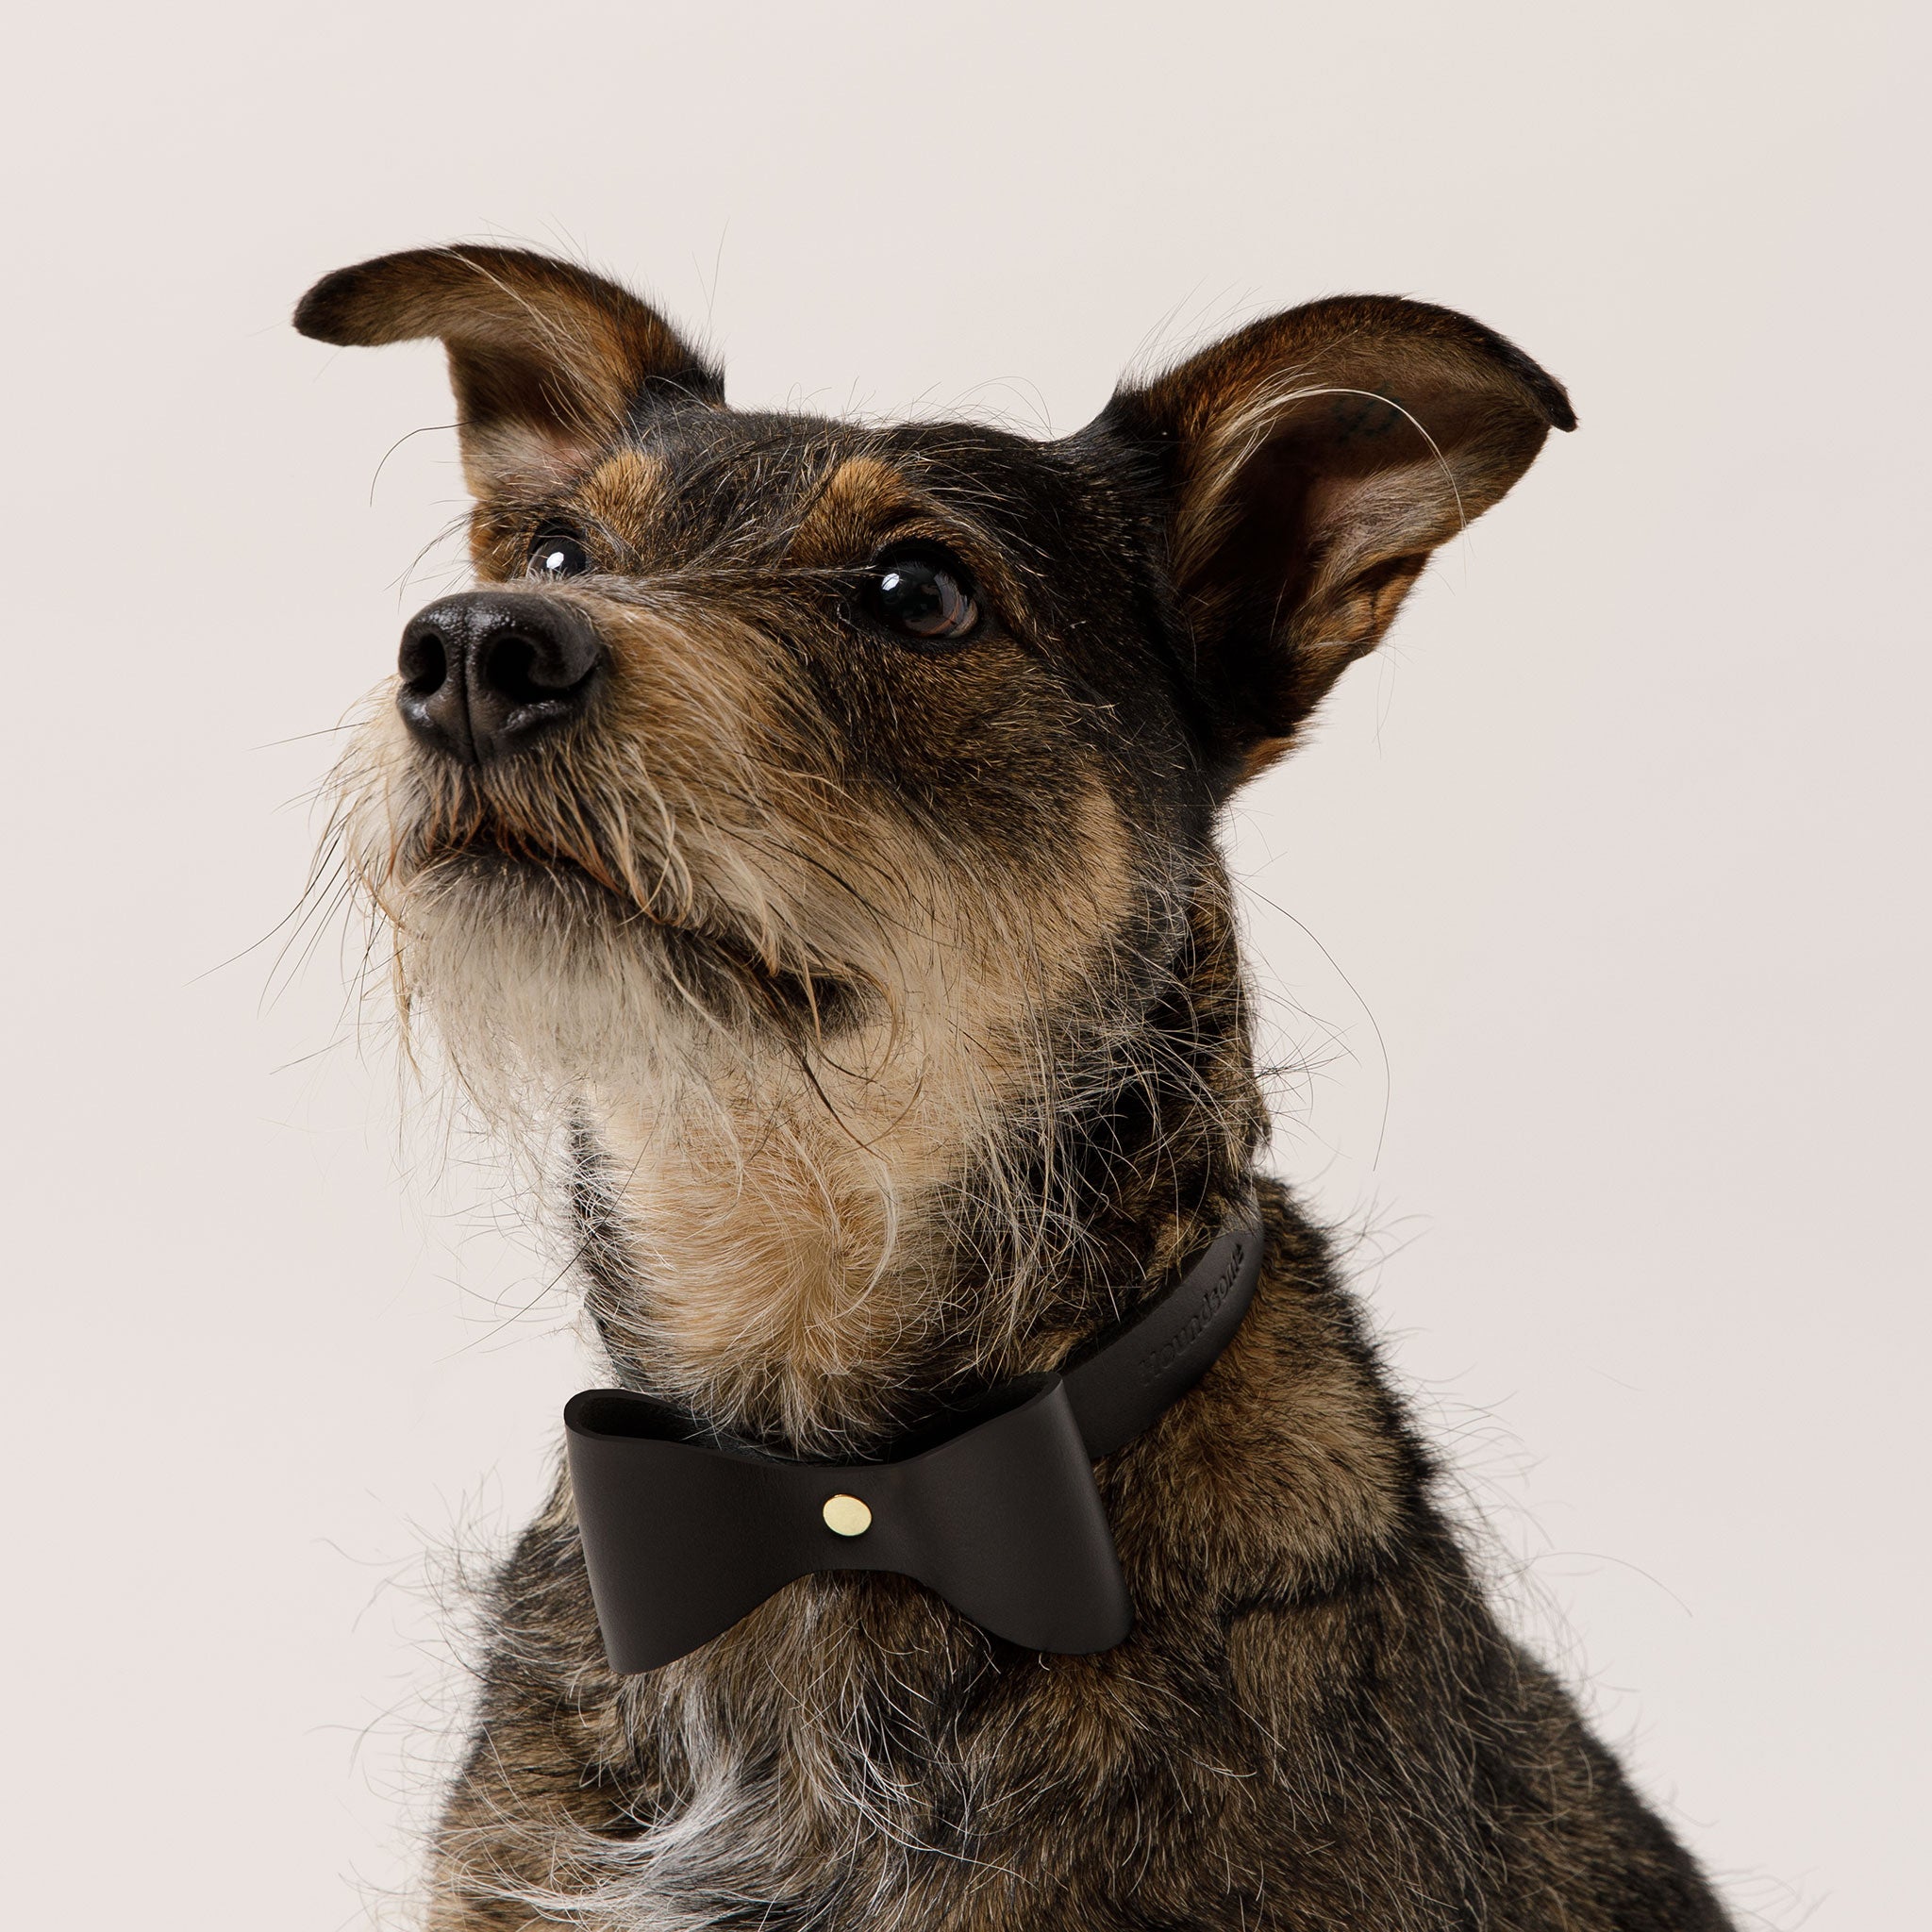 Brocky Leather Bow Dog Collar in Black